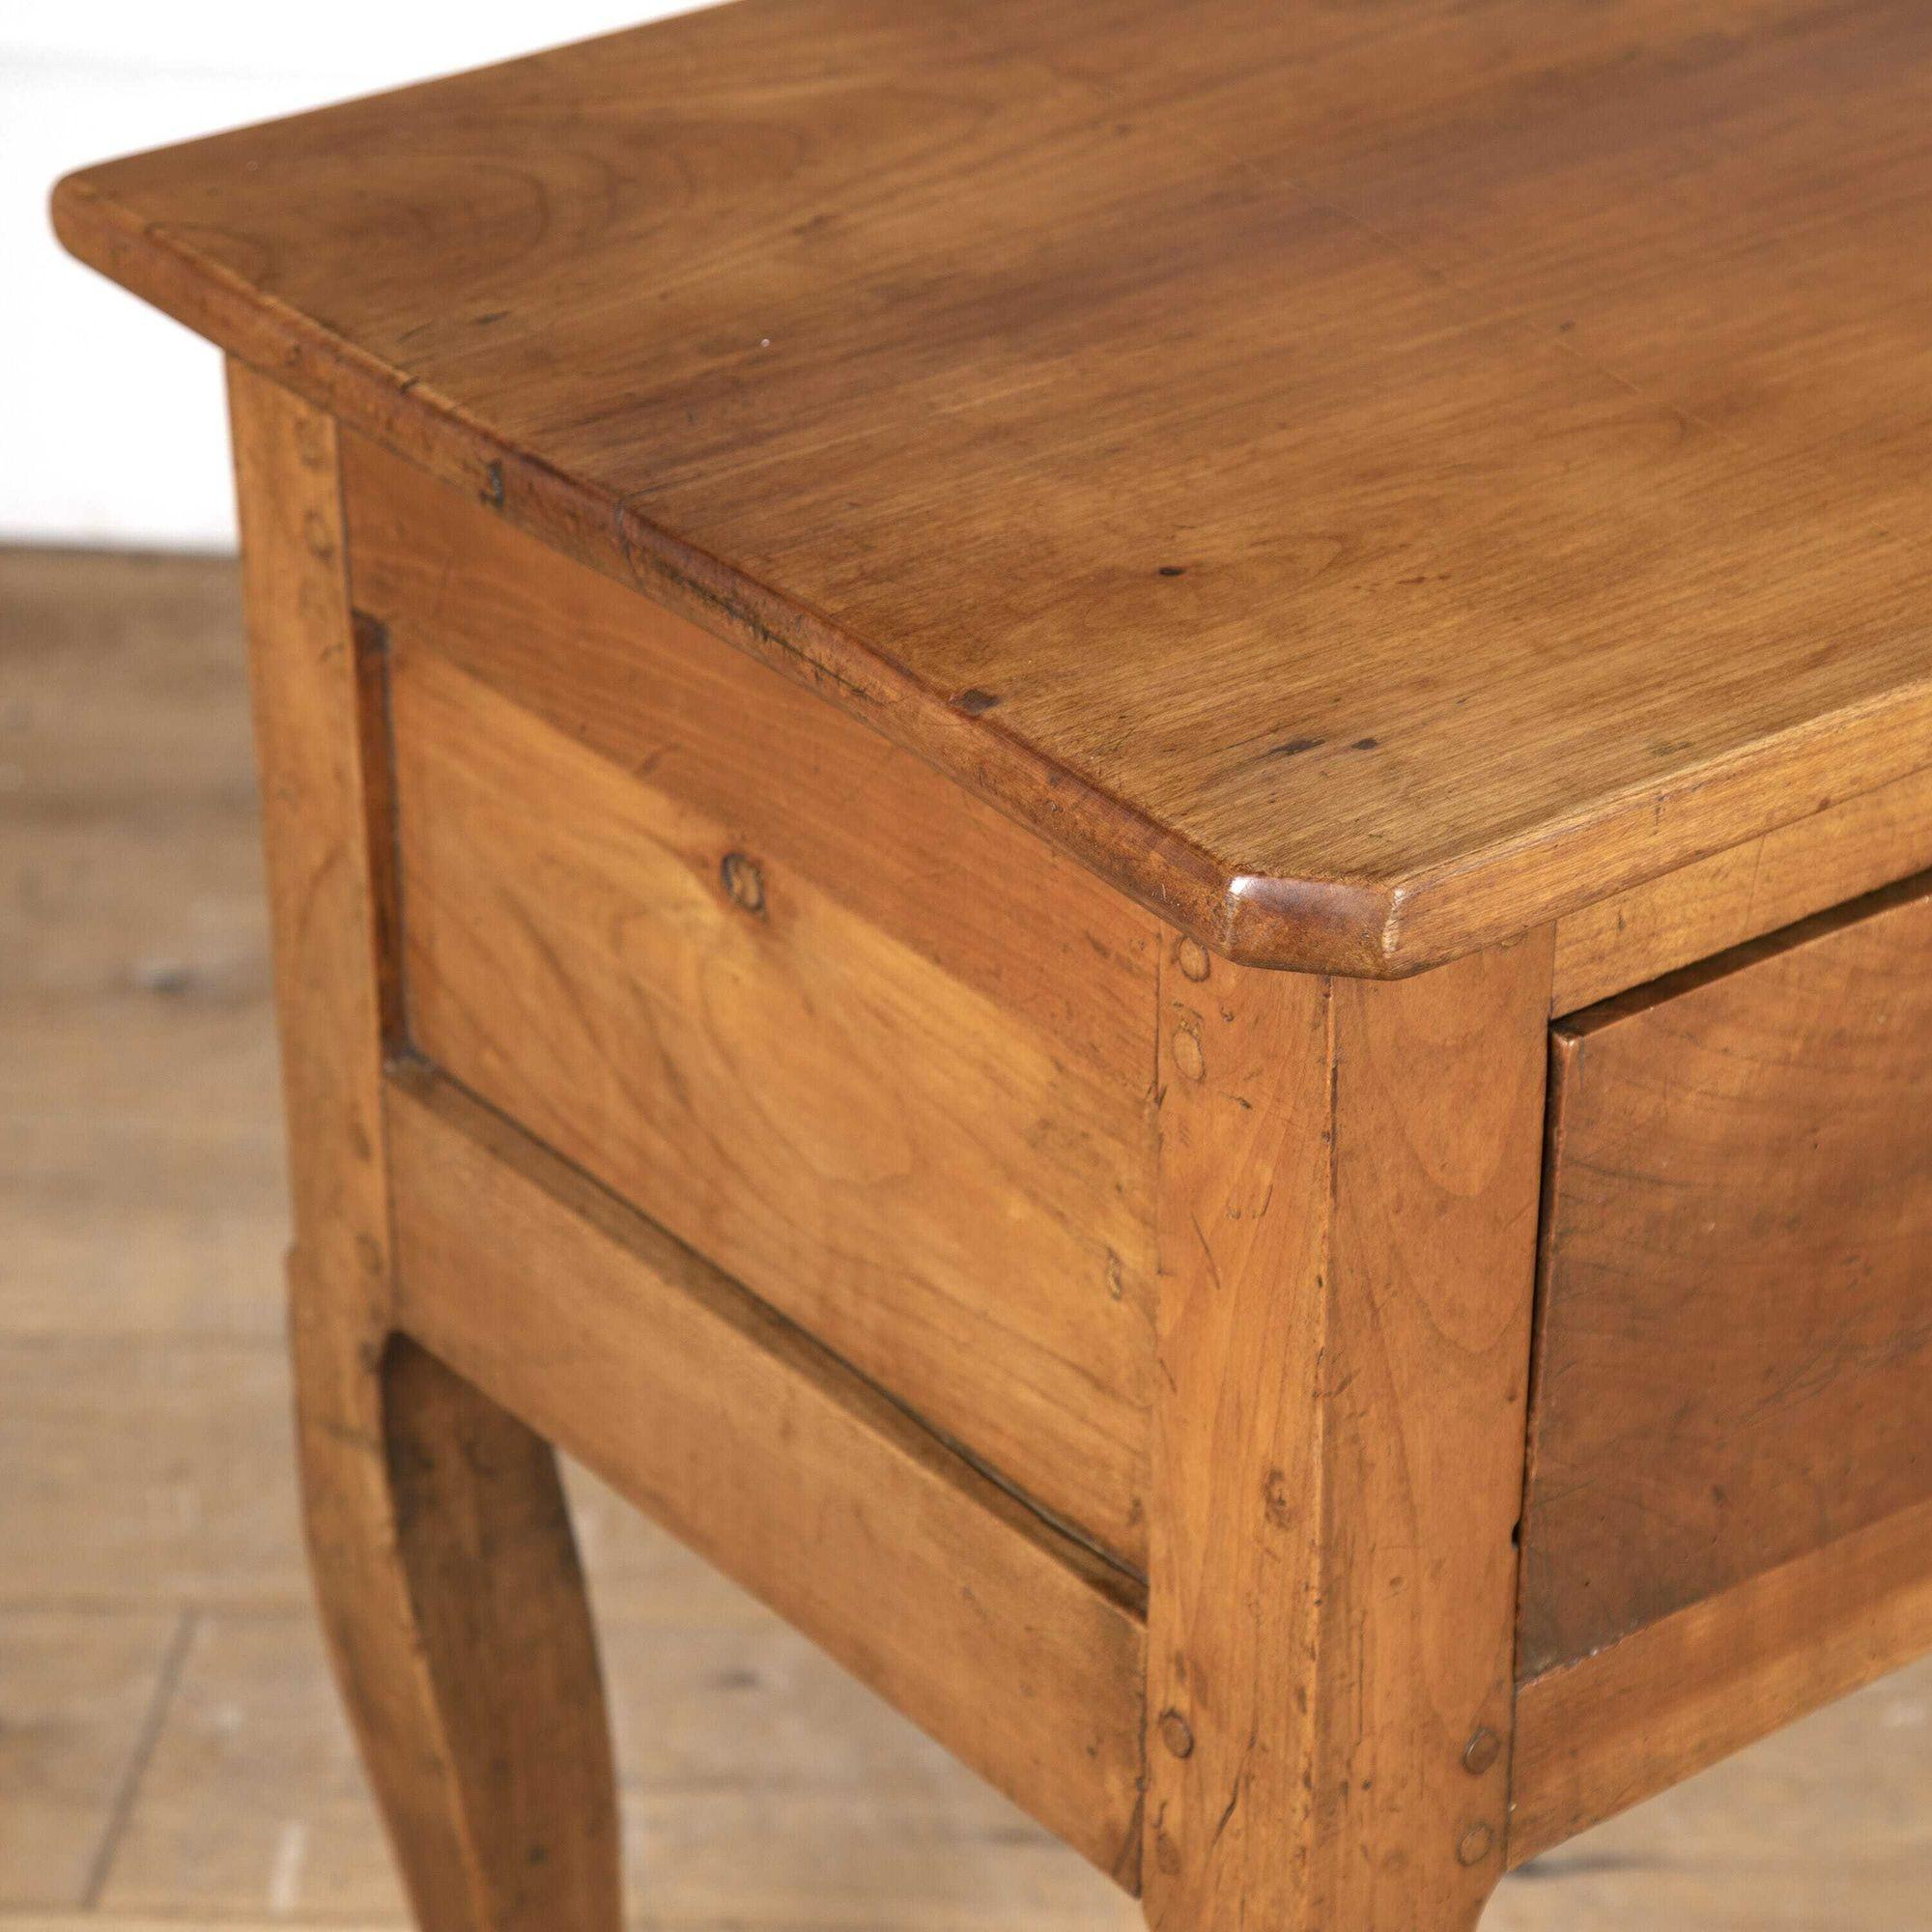 Charming 19th century cherrywood dresser base.
Originally from the Brittany area of France, with its original handles. This is a free-standing piece of furniture, that has been beautifully polished to highlight its cherrywood graining and natural